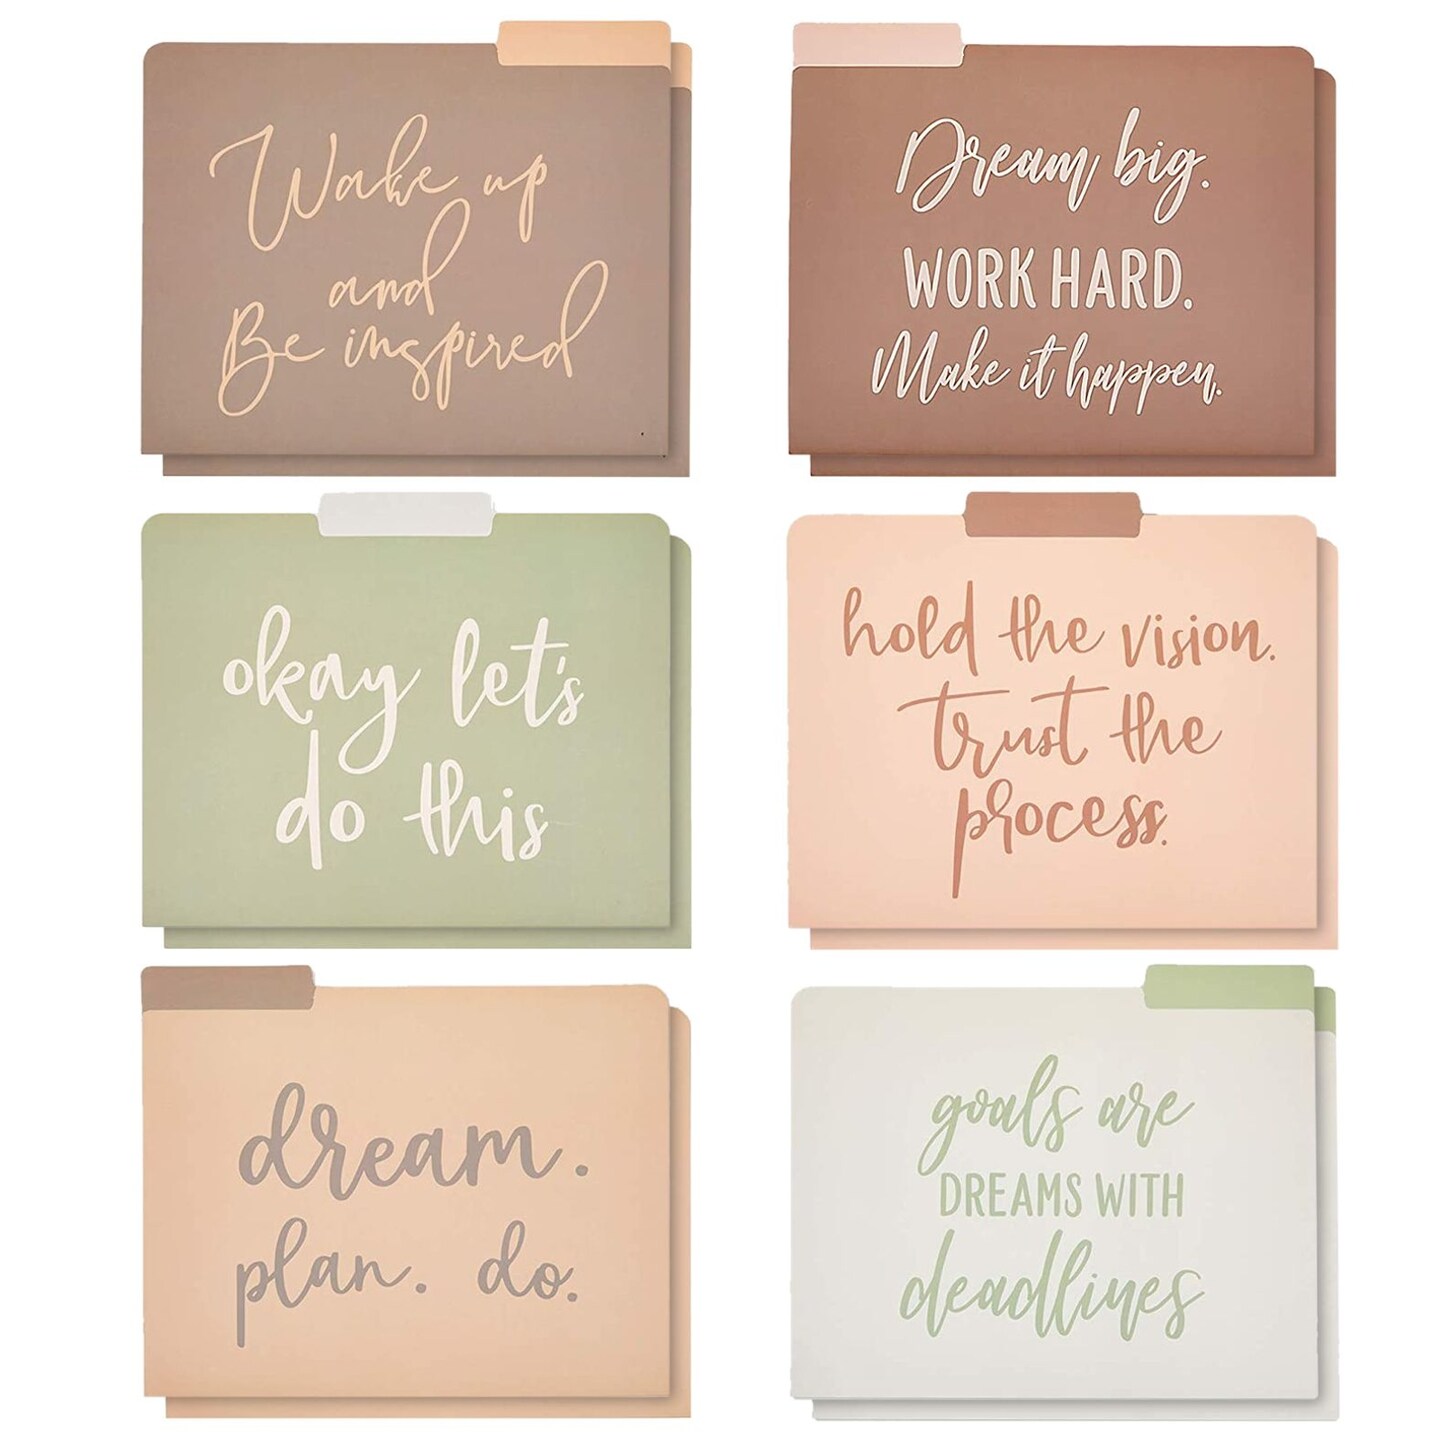 12 Pack Decorative File Folders, Letter Size for Women, Cute Earth Tone Aesthetic Office Supplies with Inspirational Sayings, 1/3 Cut Tabs (11.5 x 9.5 In)